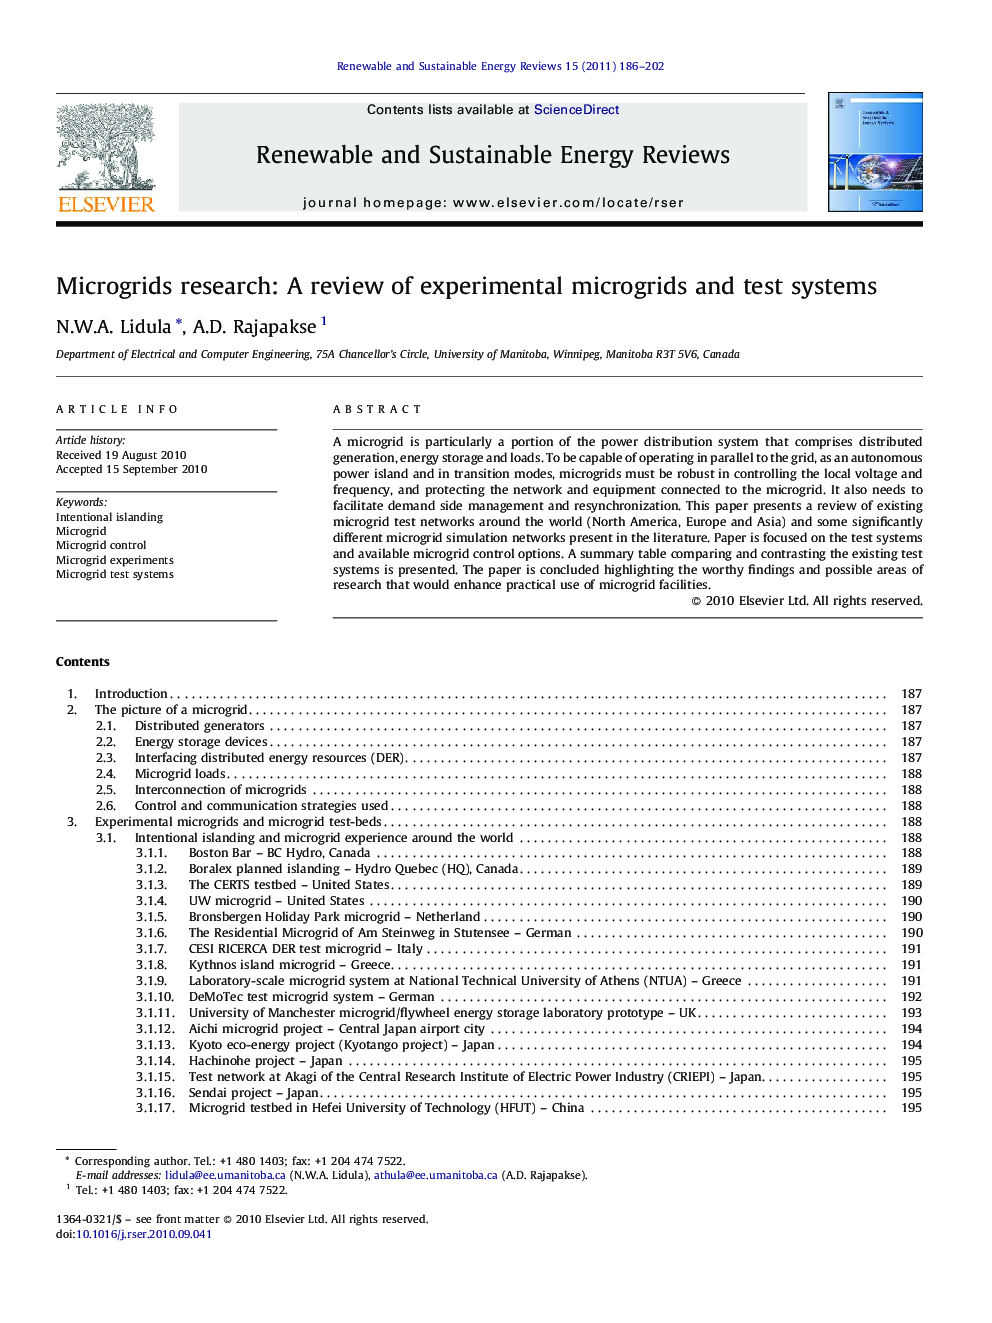 Microgrids research: A review of experimental microgrids and test systems